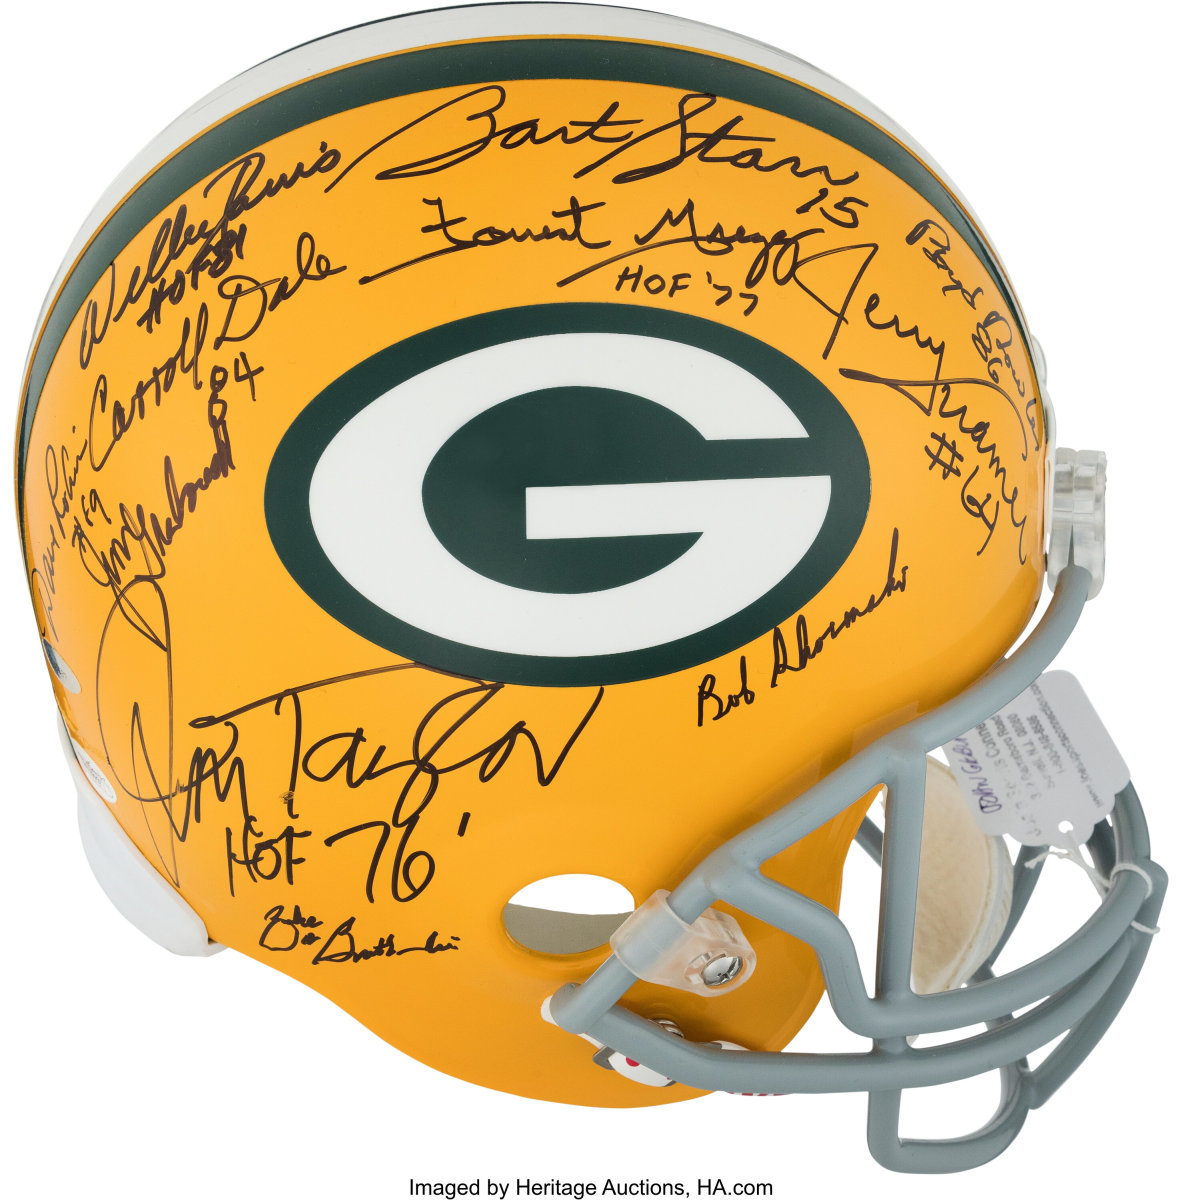 Green Bay Packers helmet signed by the 1966 championship team.